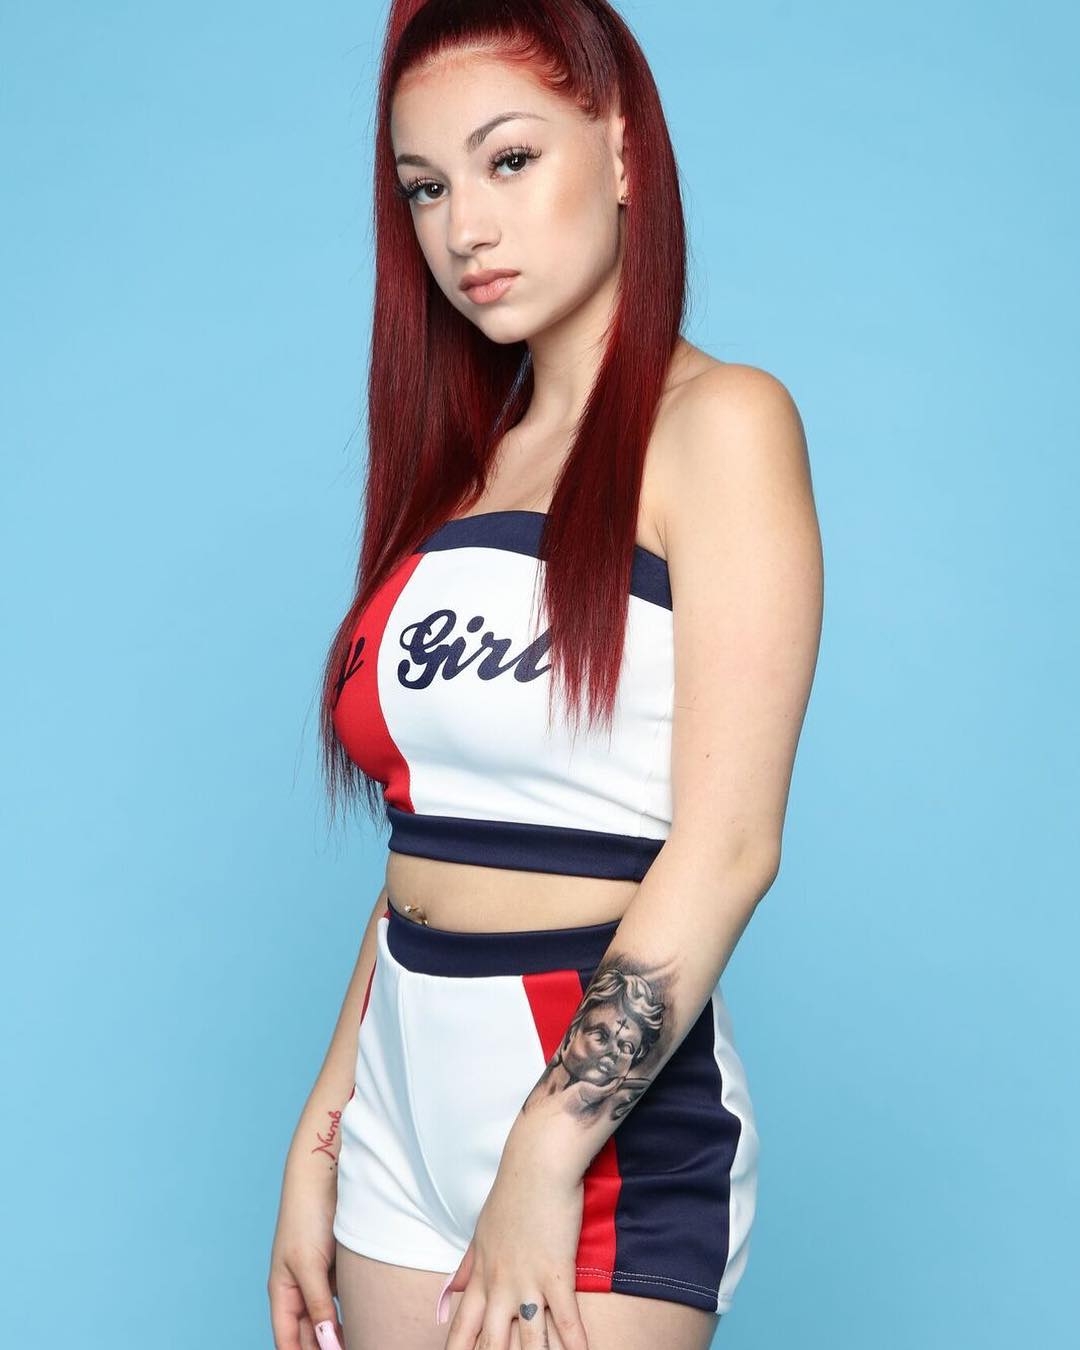 75+ Hot Pictures Of Danielle Bregoli aka Bhad Bhabie Which Will Win Your Heart | Best Of Comic Books